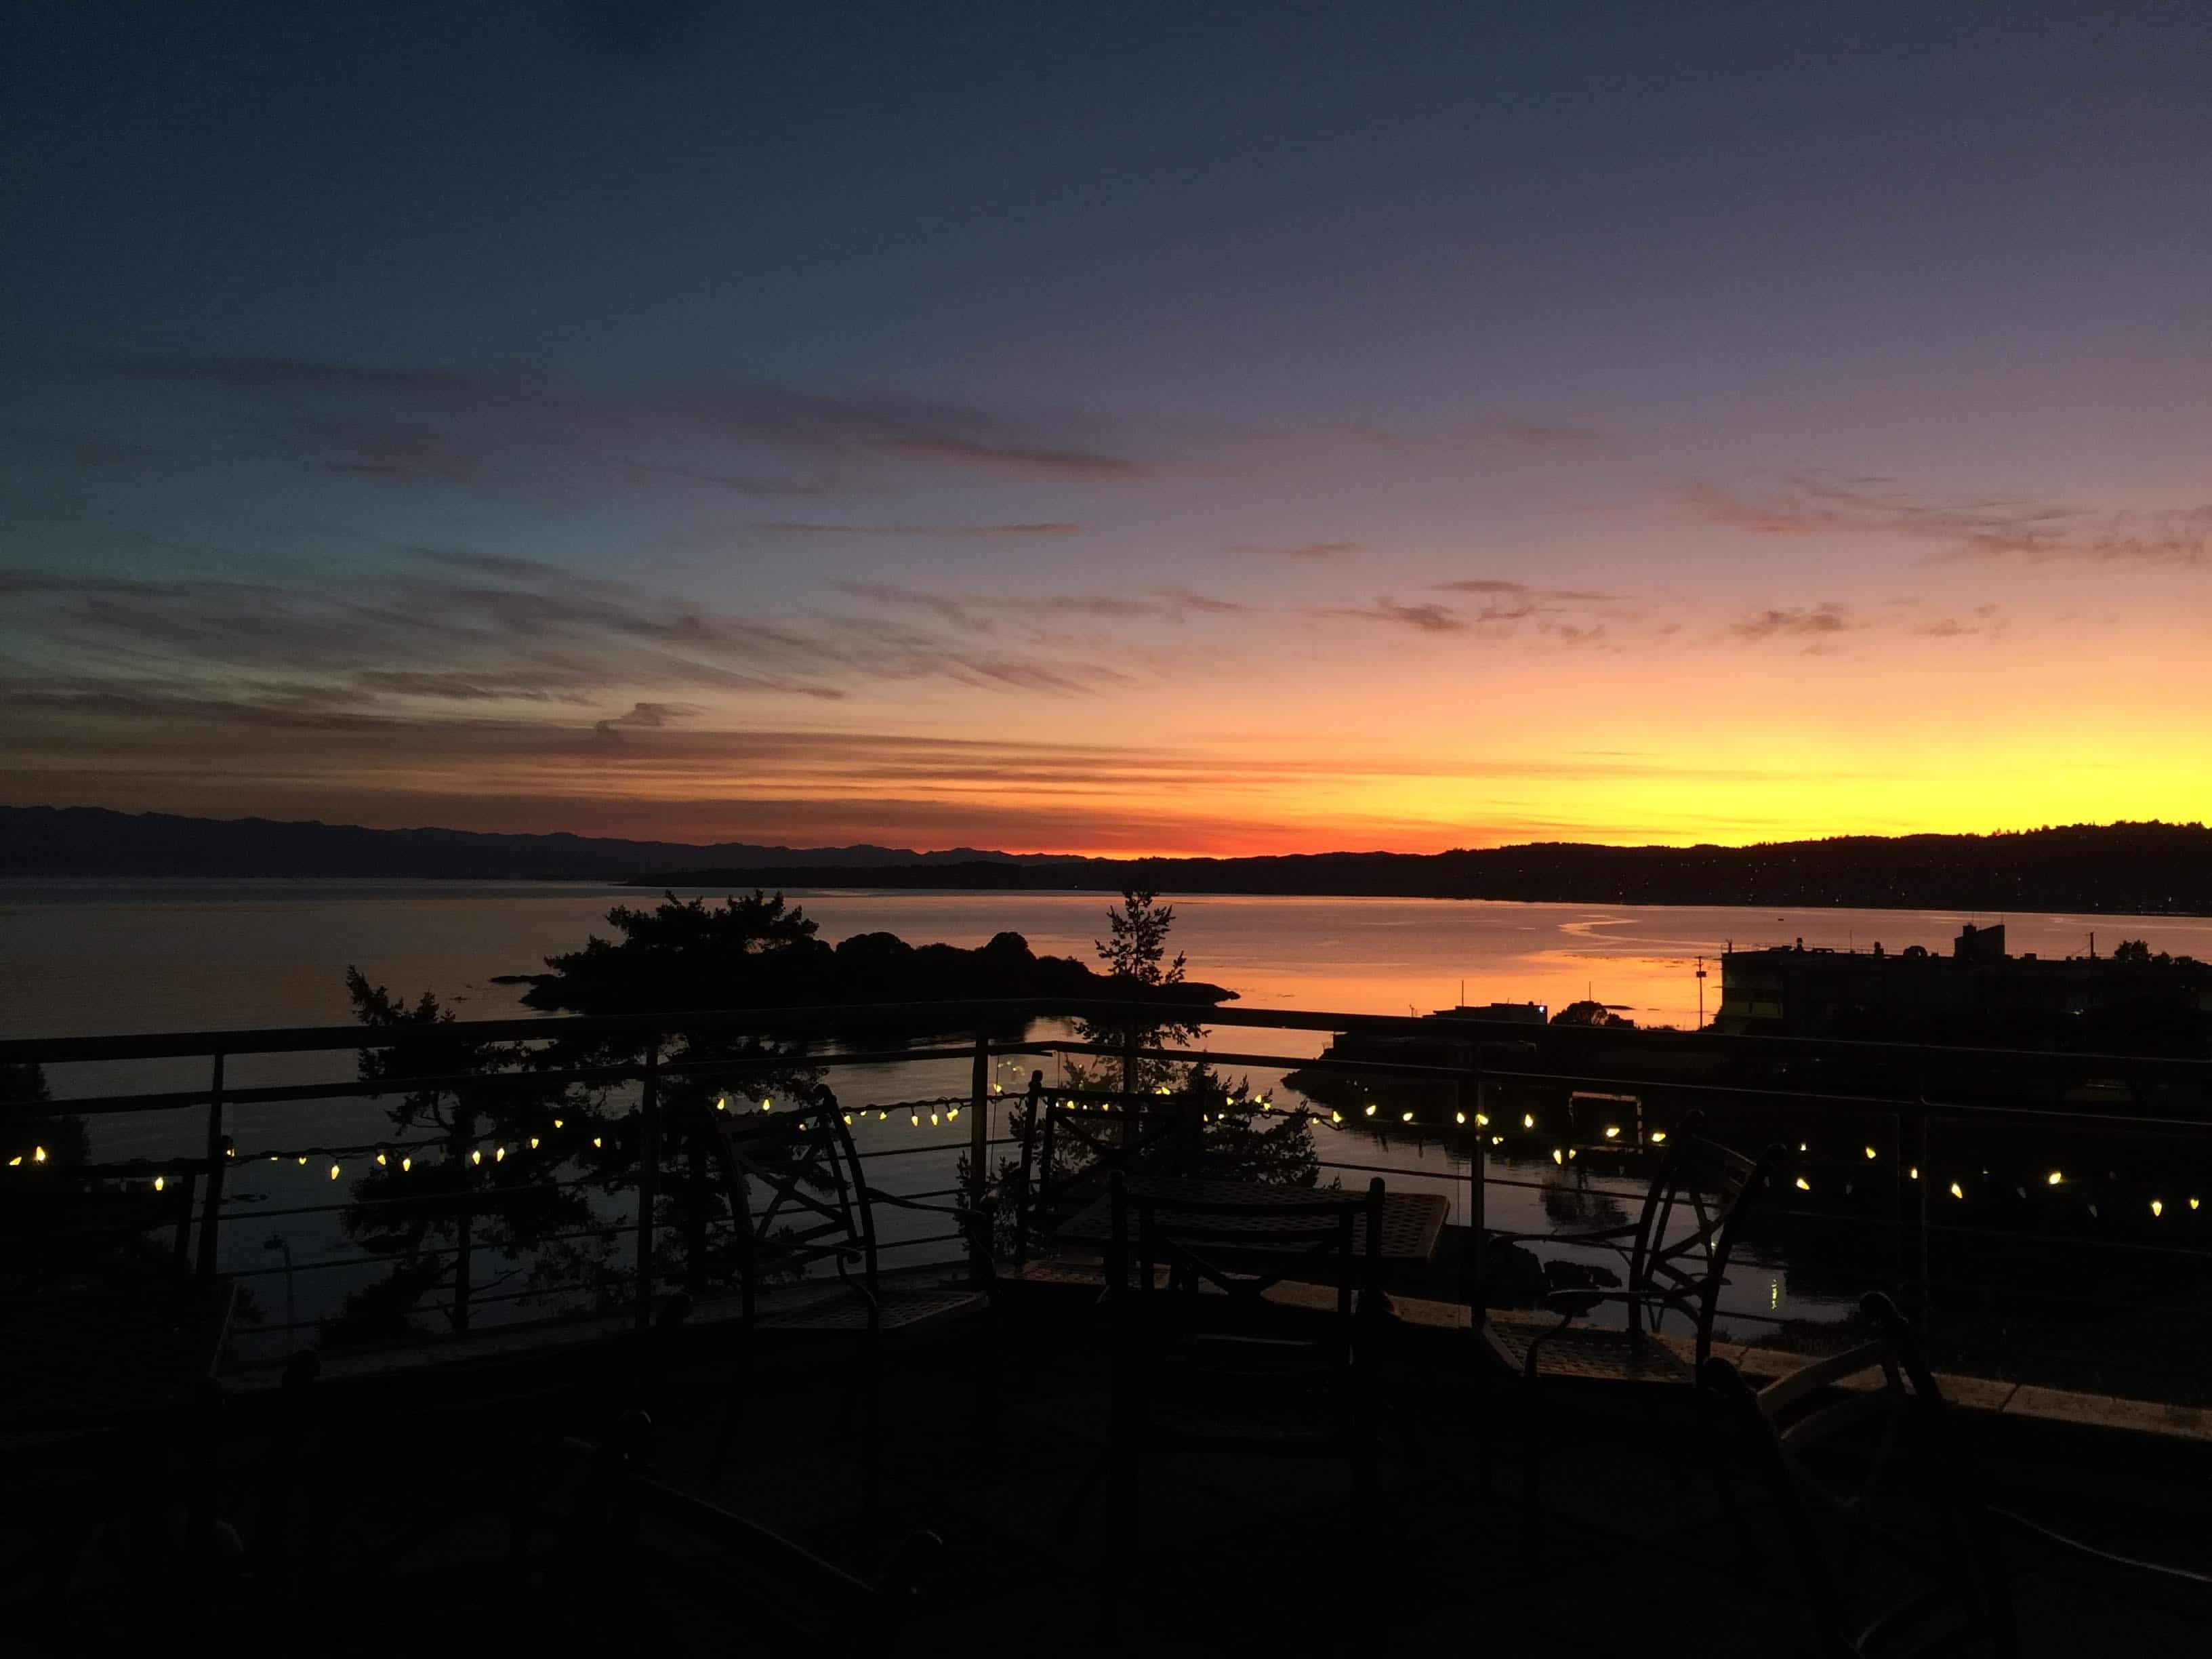 Things to do in Esquimalt, view of sunset from the deck of the Ward room CFB Esquimalt taken 29 Oct 2019.